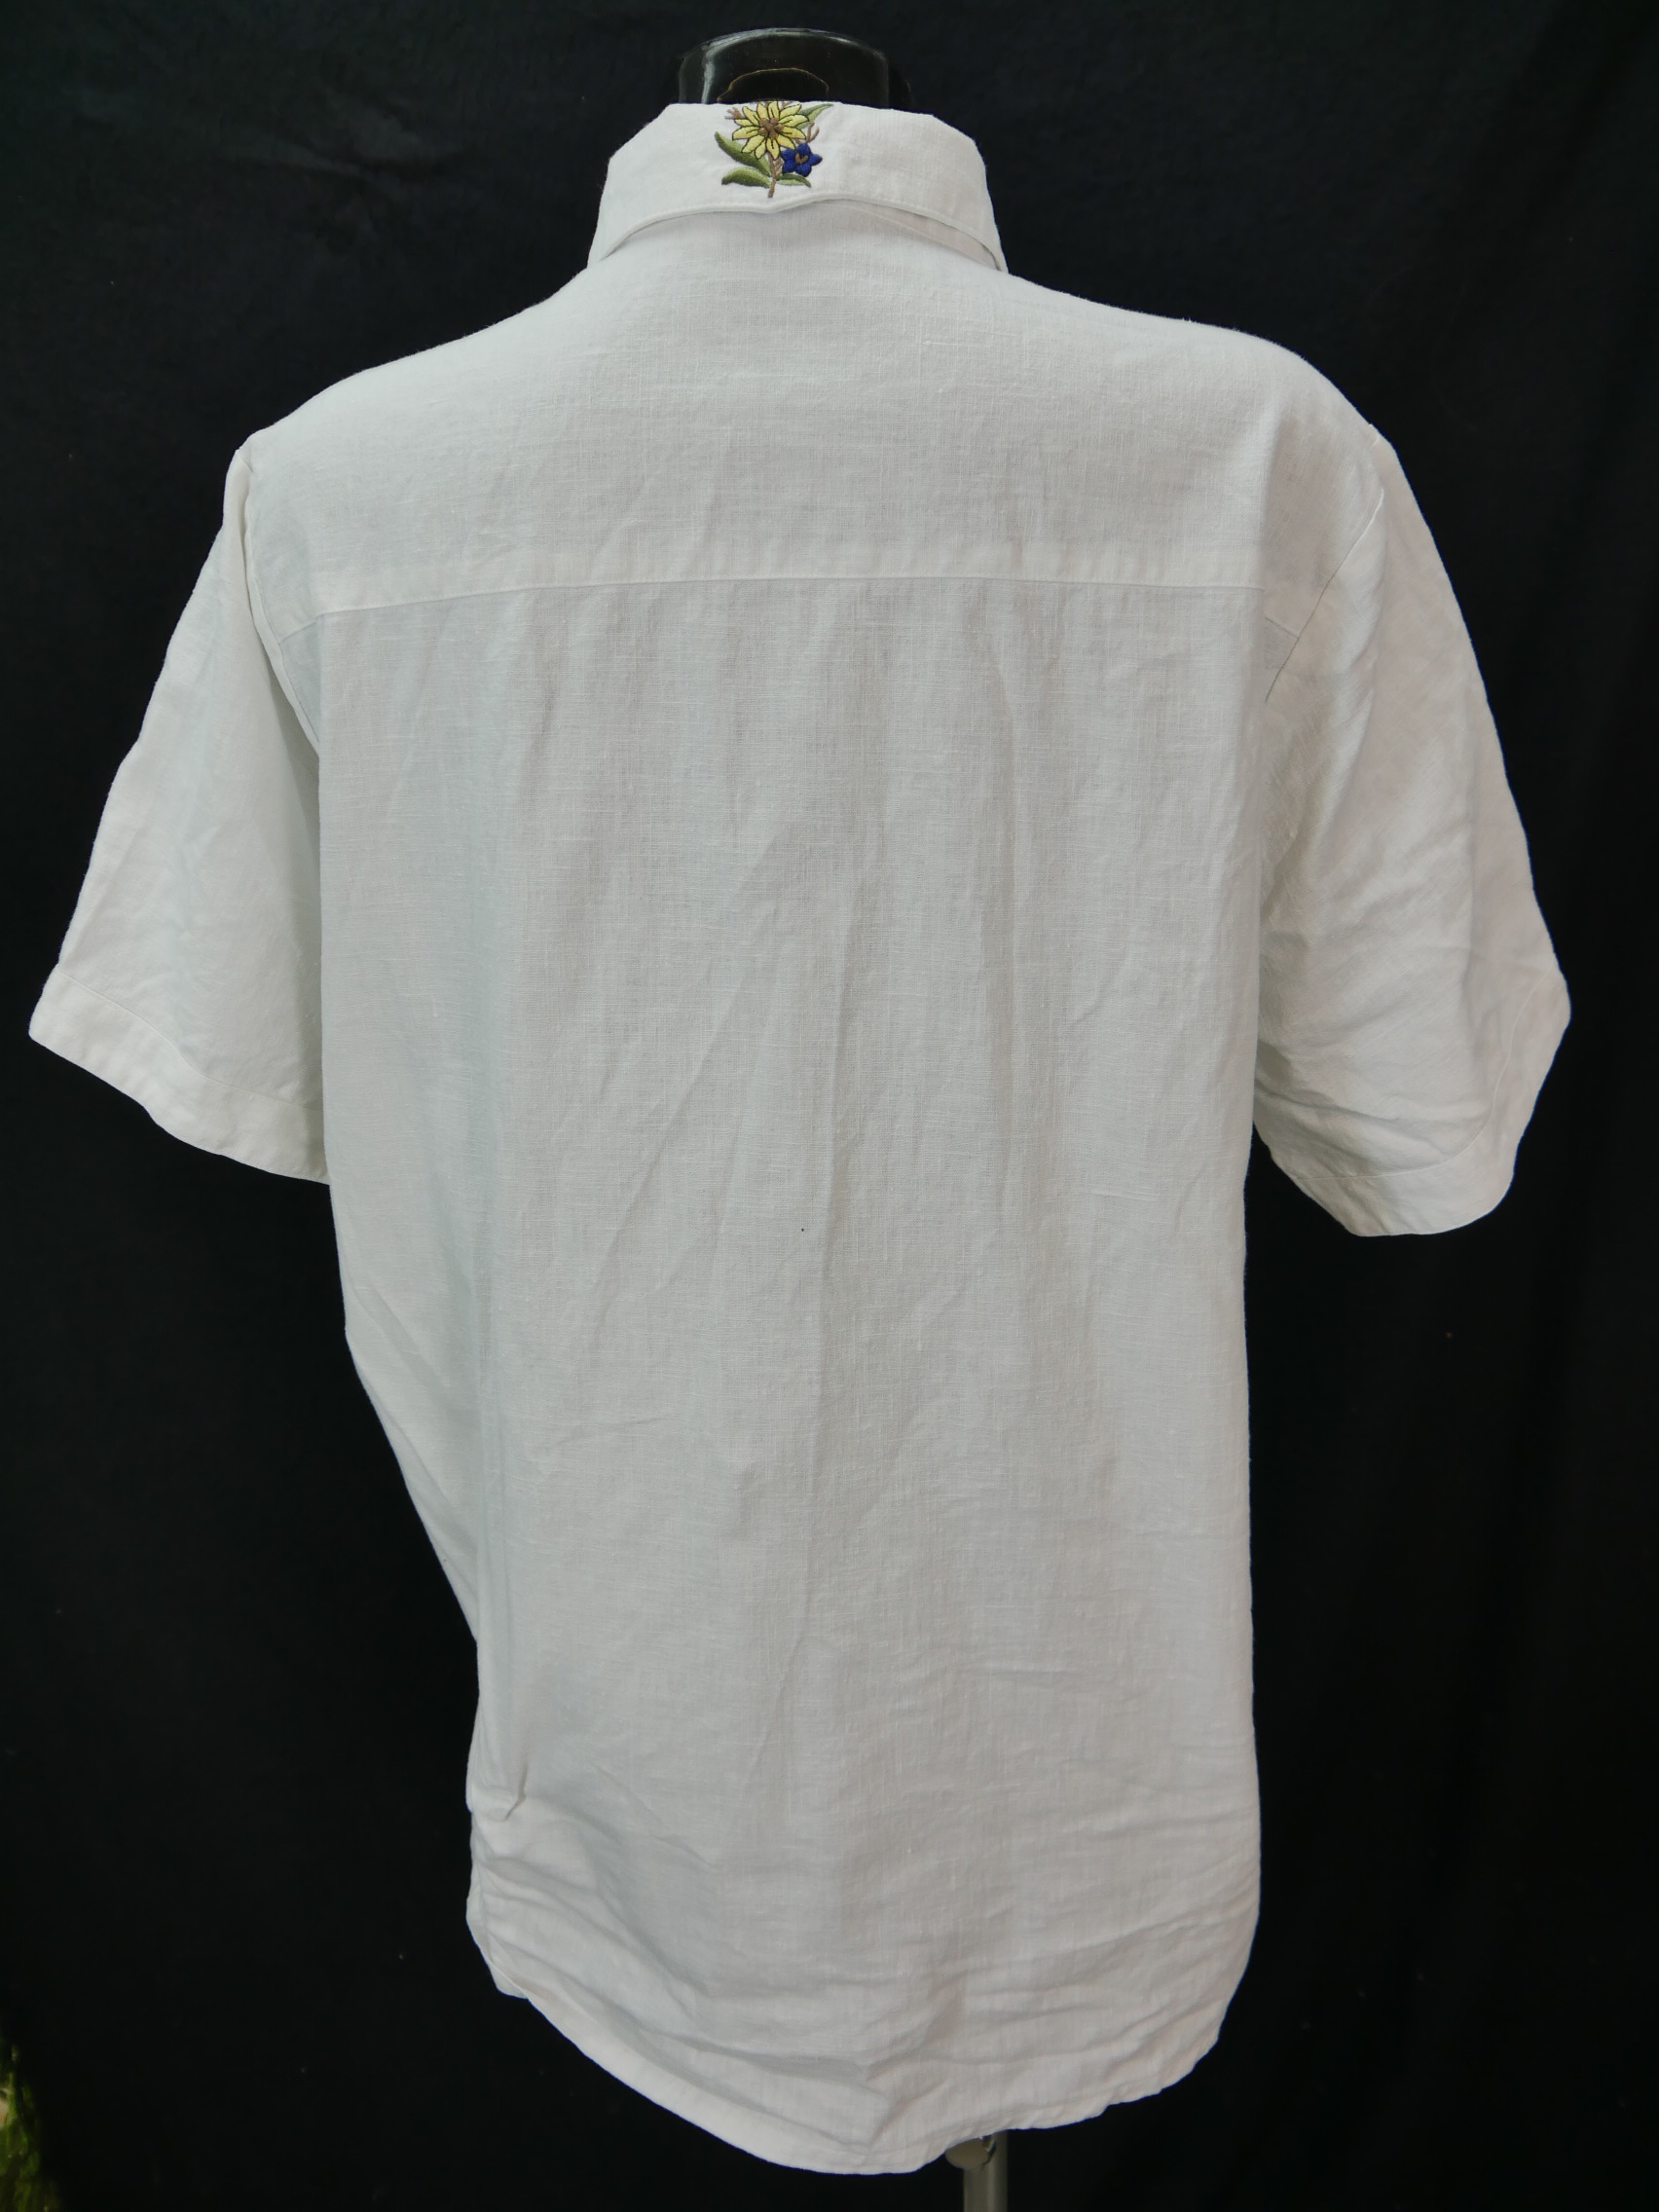 Size 44 Trachten blouse white Blouse modern style linen blend with ...